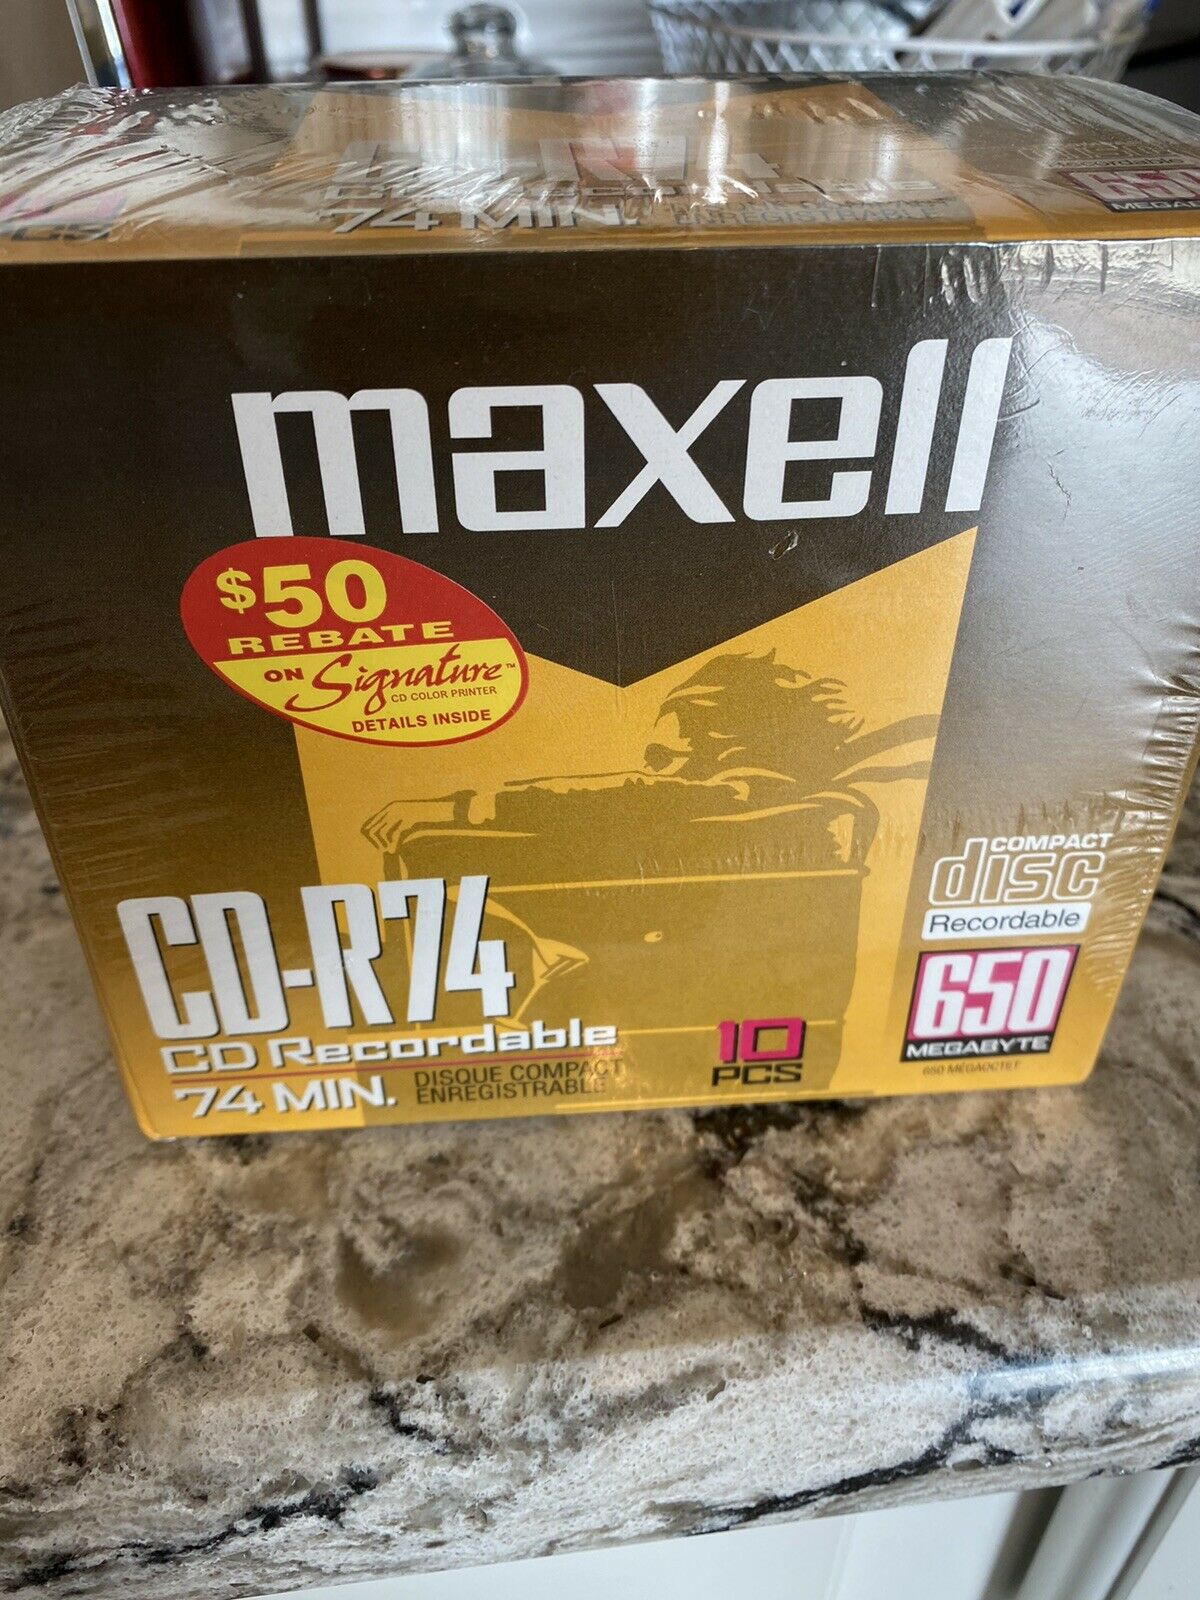 Maxell Cd-r74 Cd Recordable, 650 Megabyte 74 Minute 1 Pack Of 10 Pcs. New Sealed